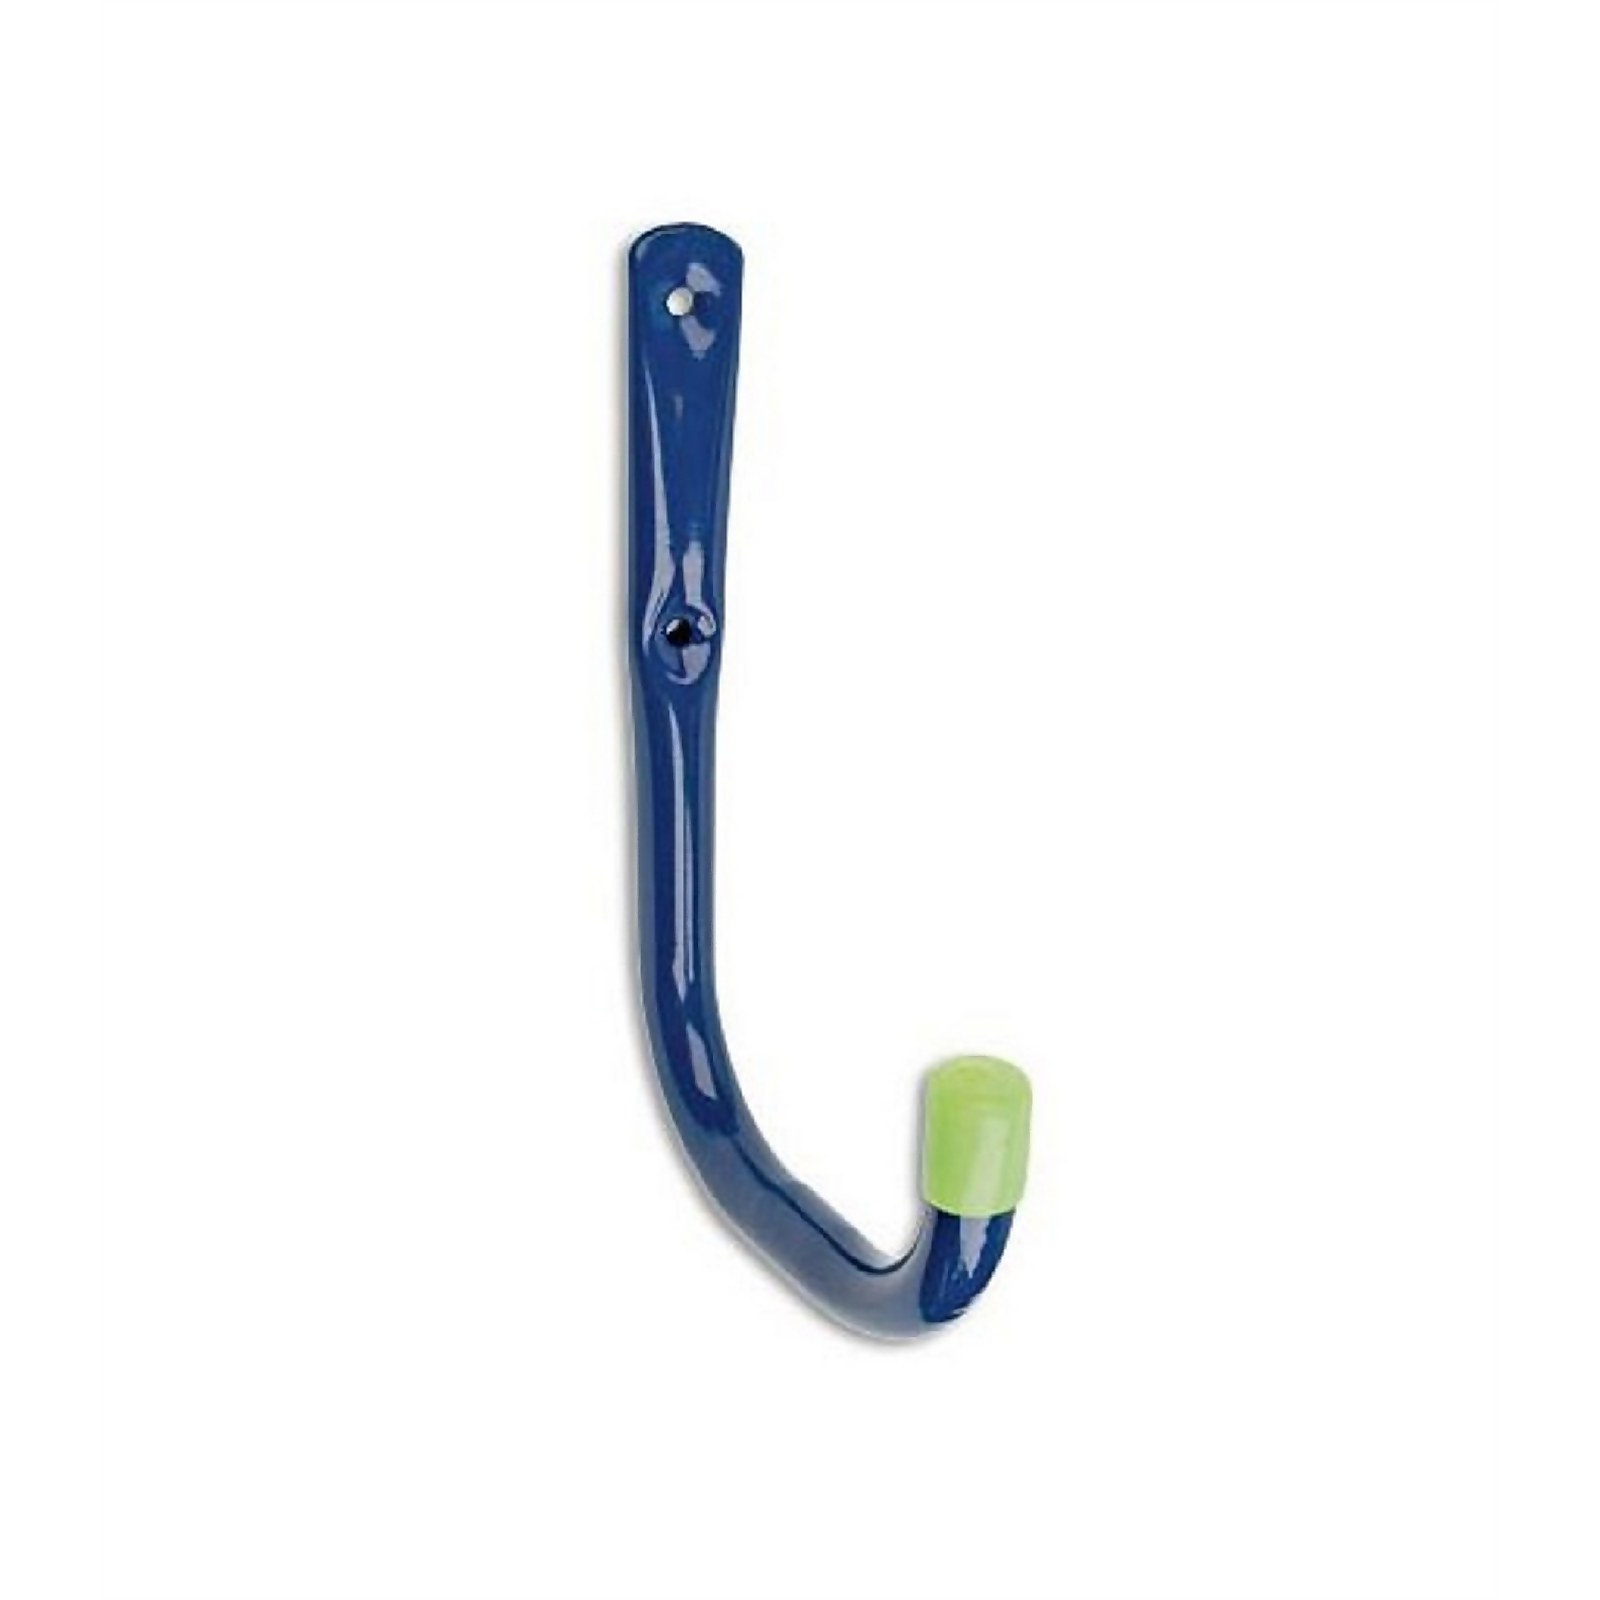 Photo of Universal Hook - Blue And Green - 70mm